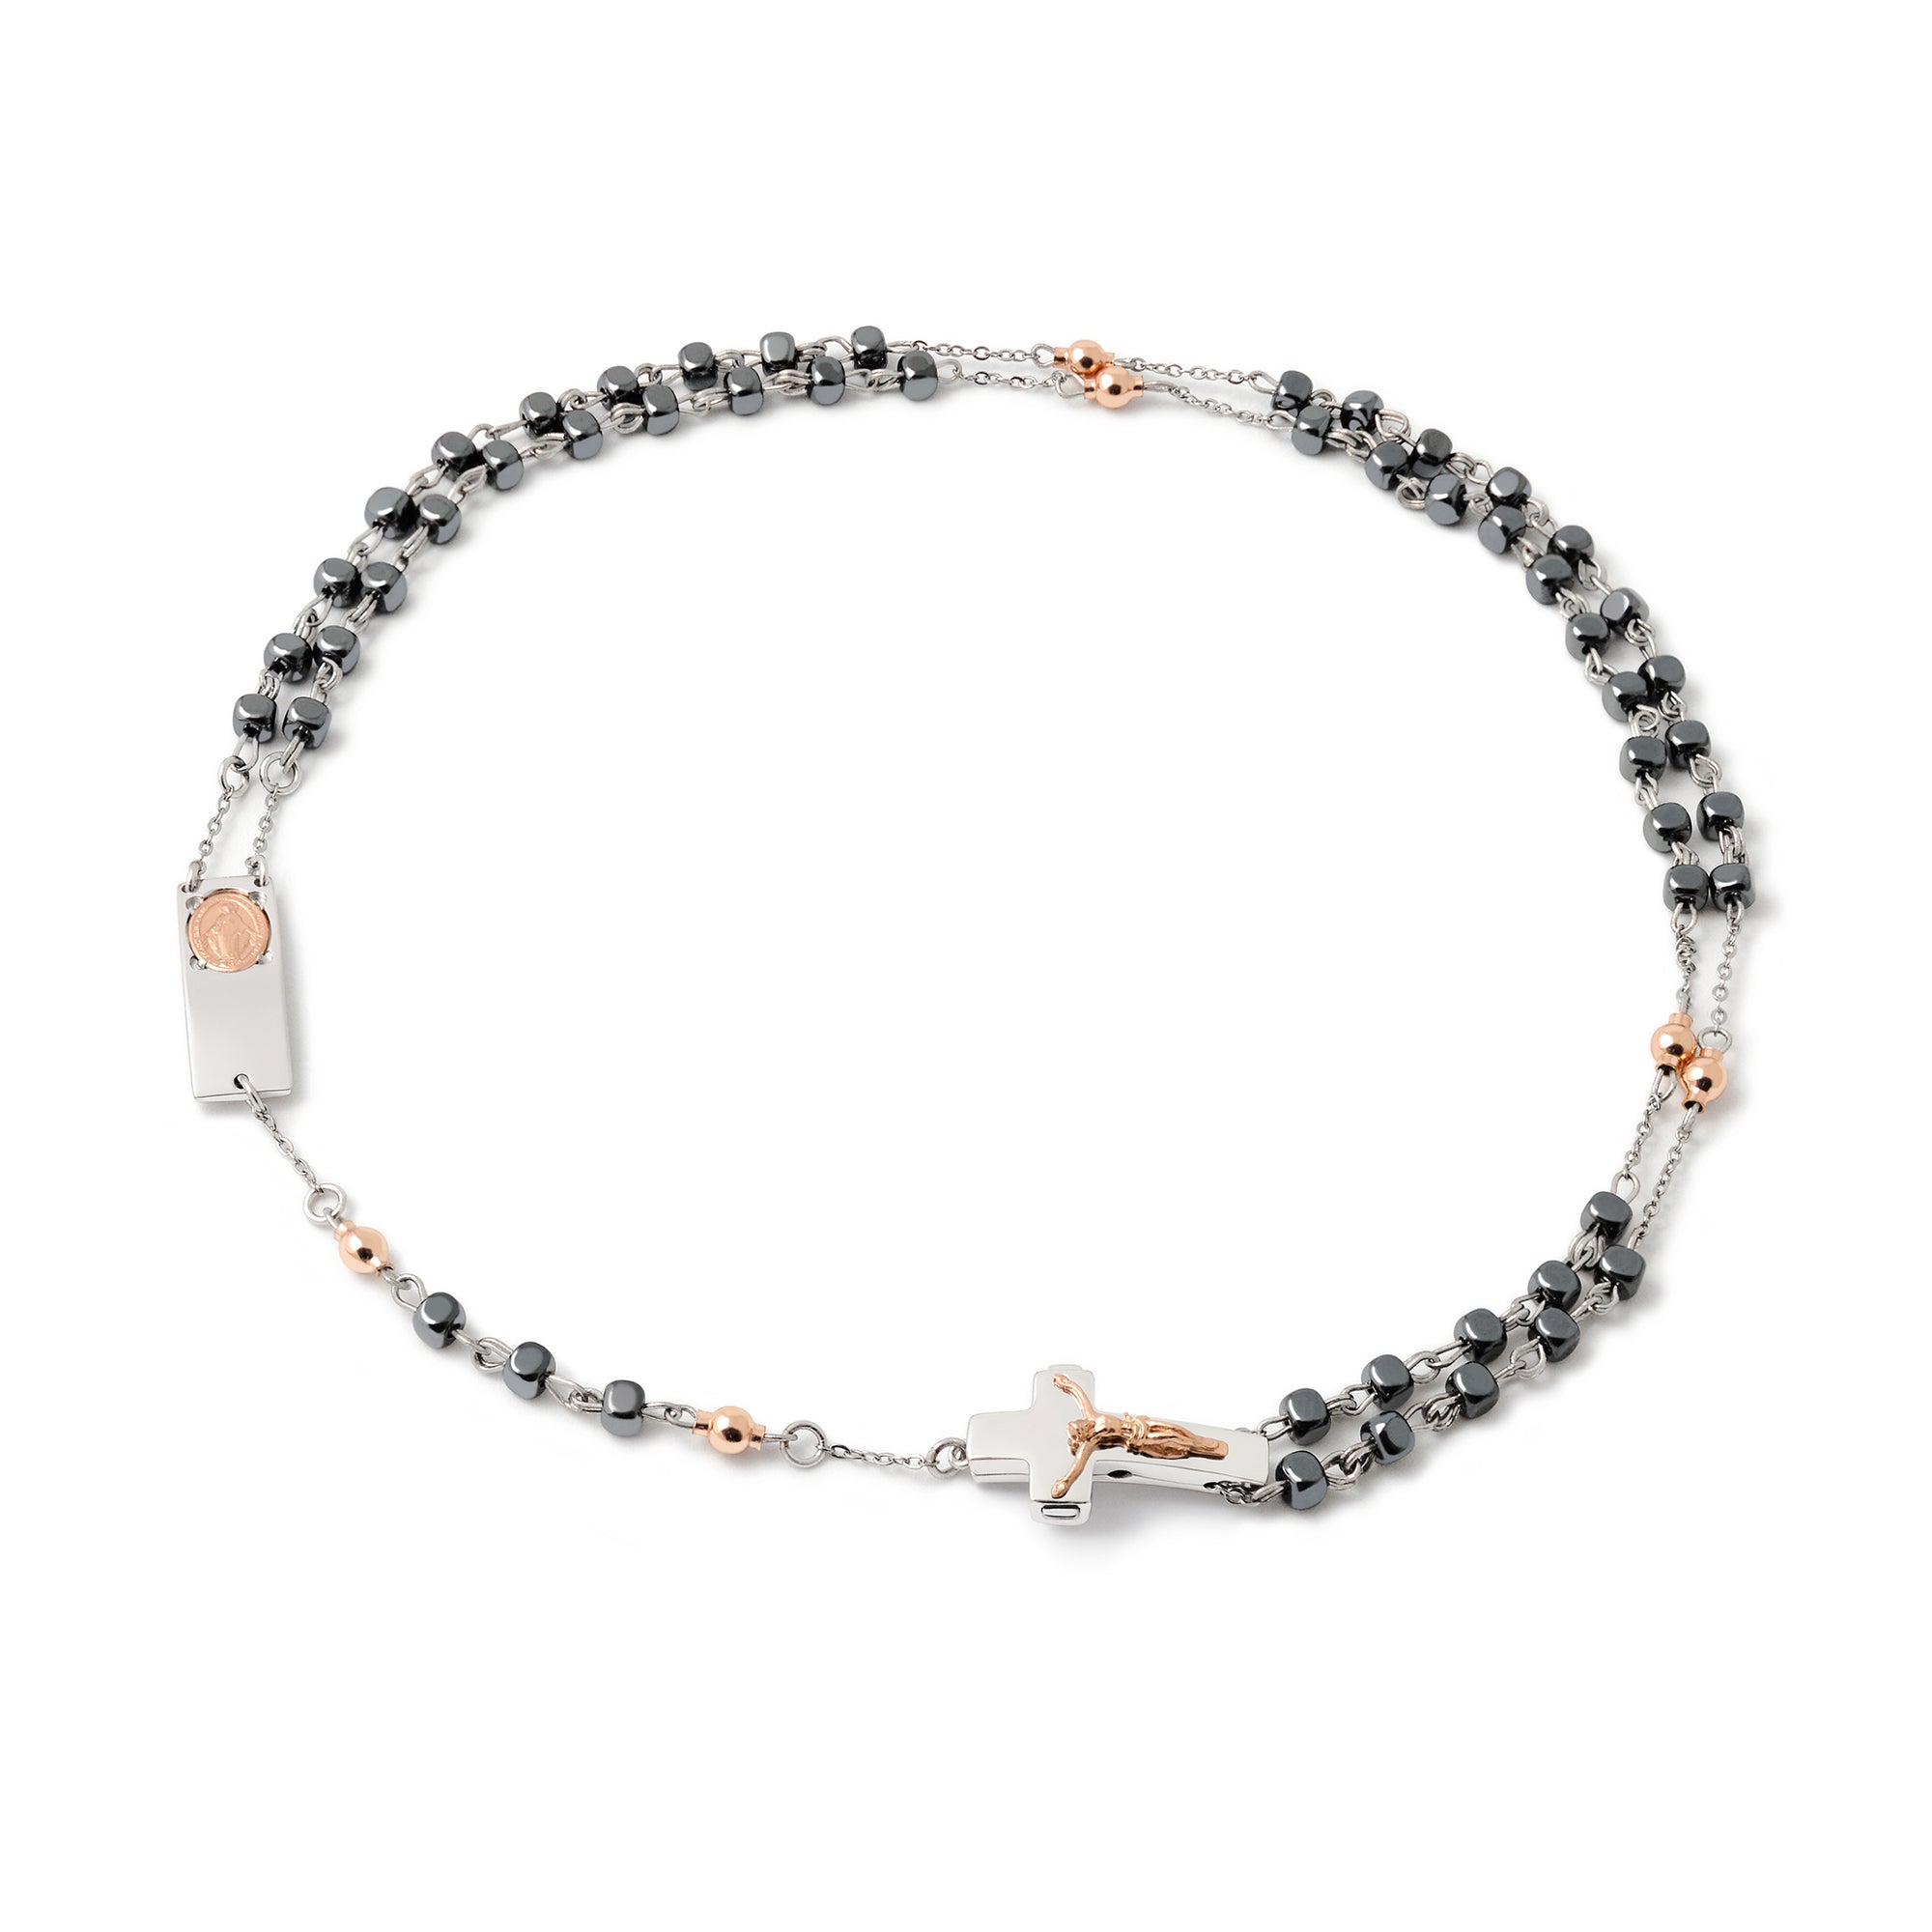 ROSALET® NECKLACE SQUARE POLISHED HEMATITE BEADS, STERLING SILVER & ROSE GOLD PATER